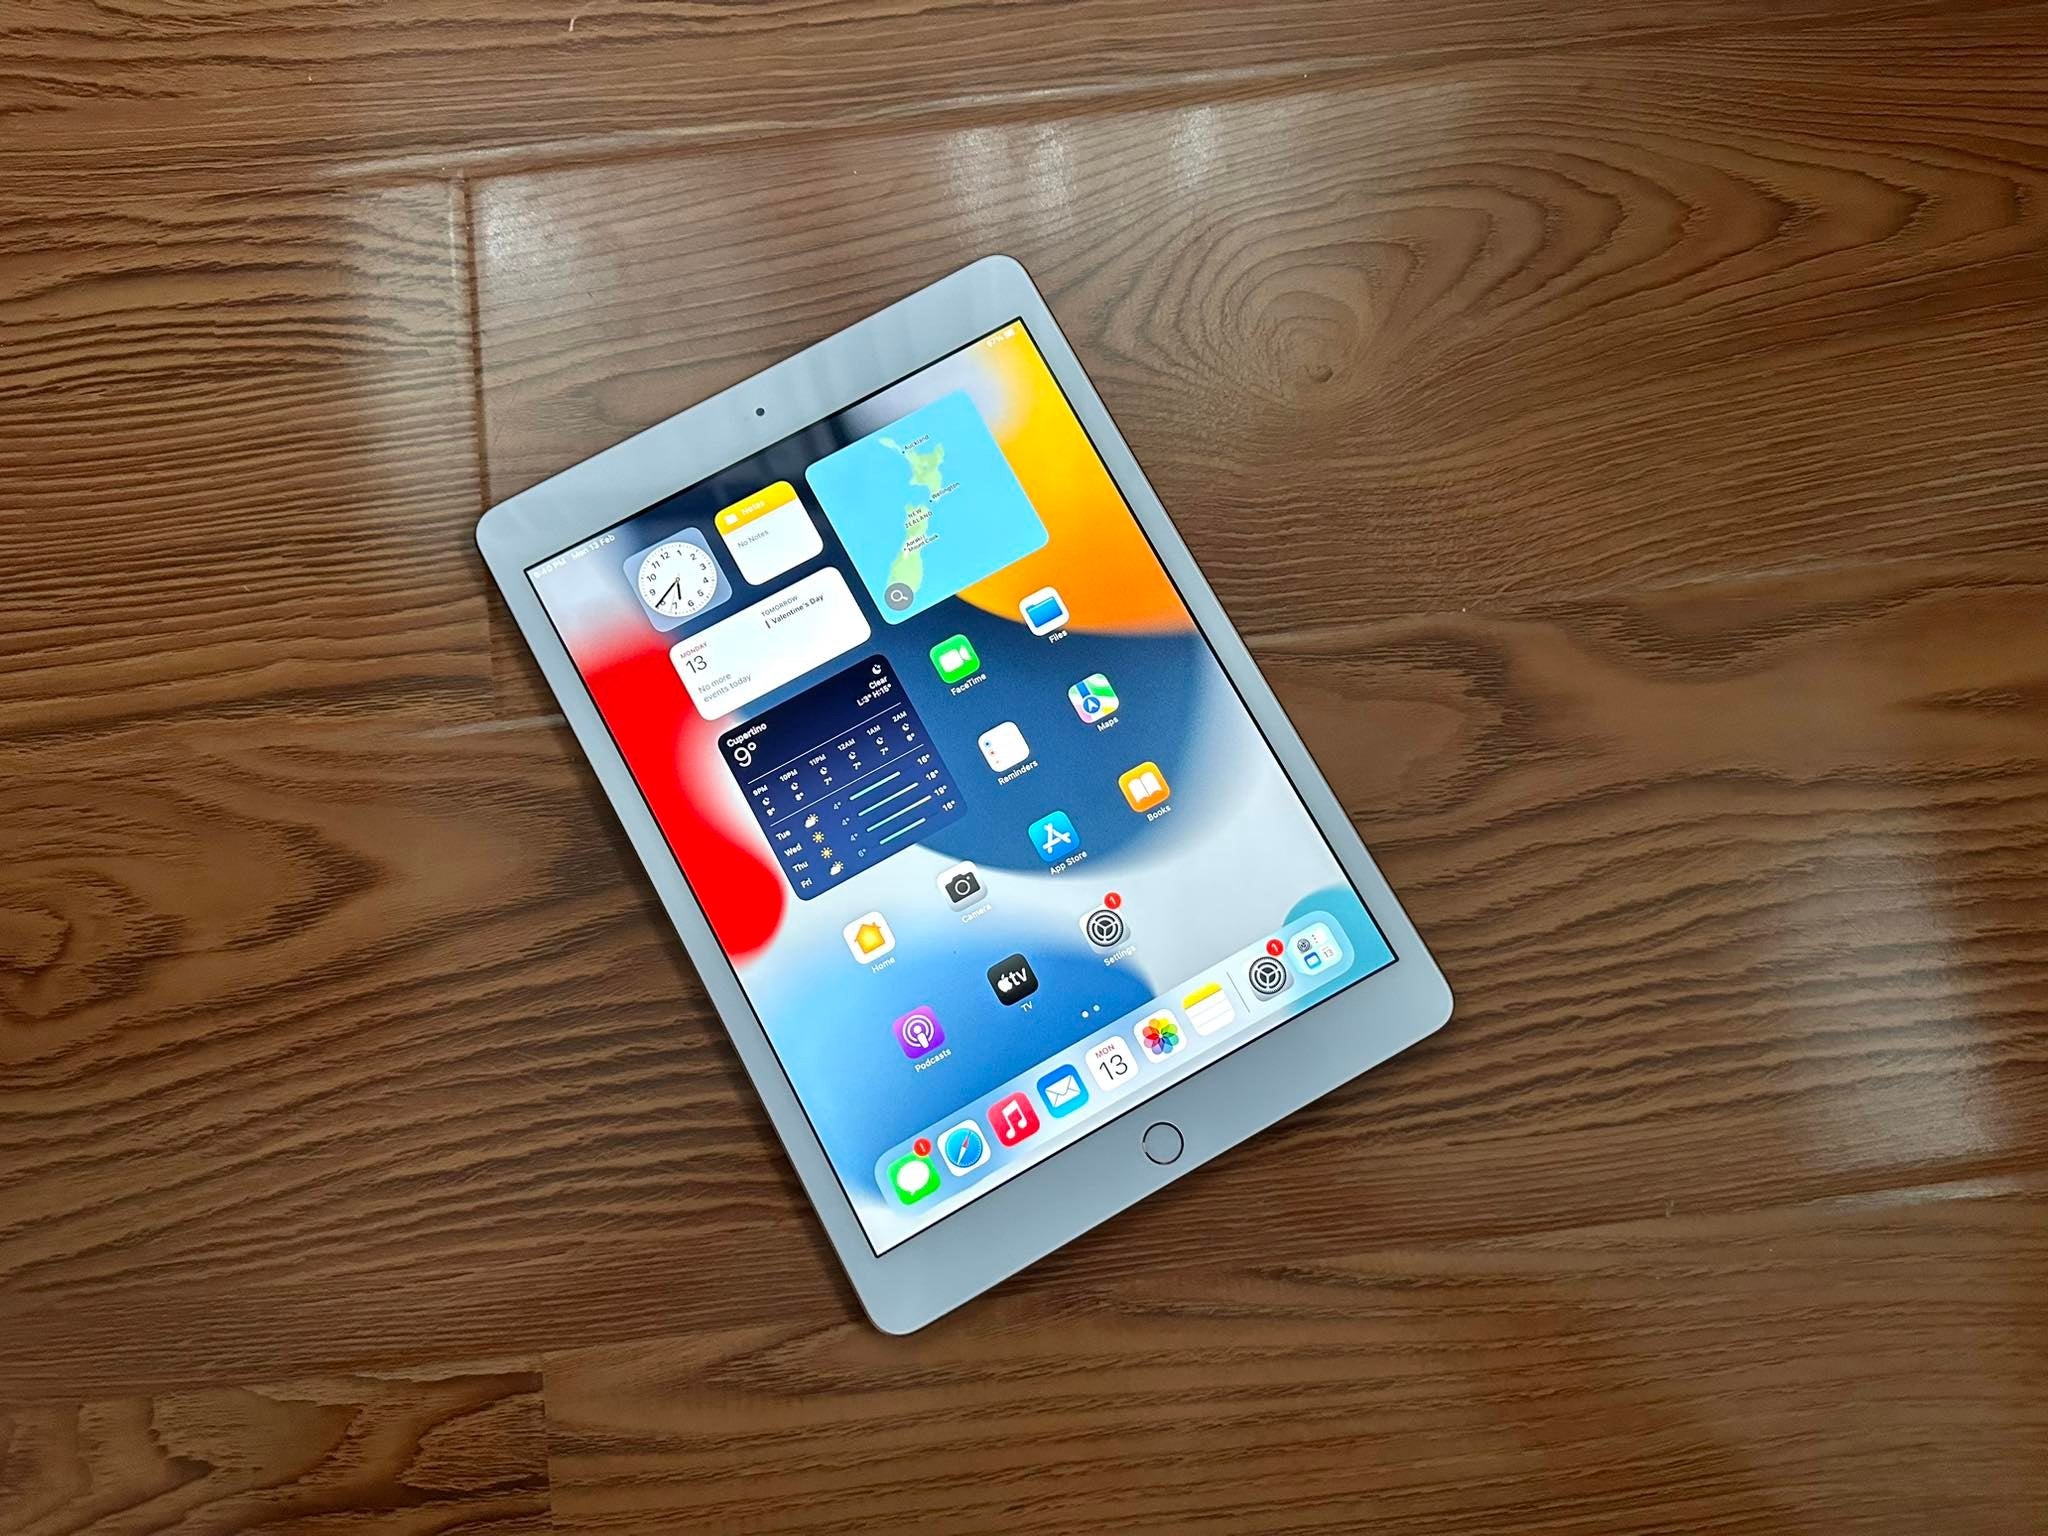 used ipads for sale,8th generation ipad refurbished,ipad 8 afterpay